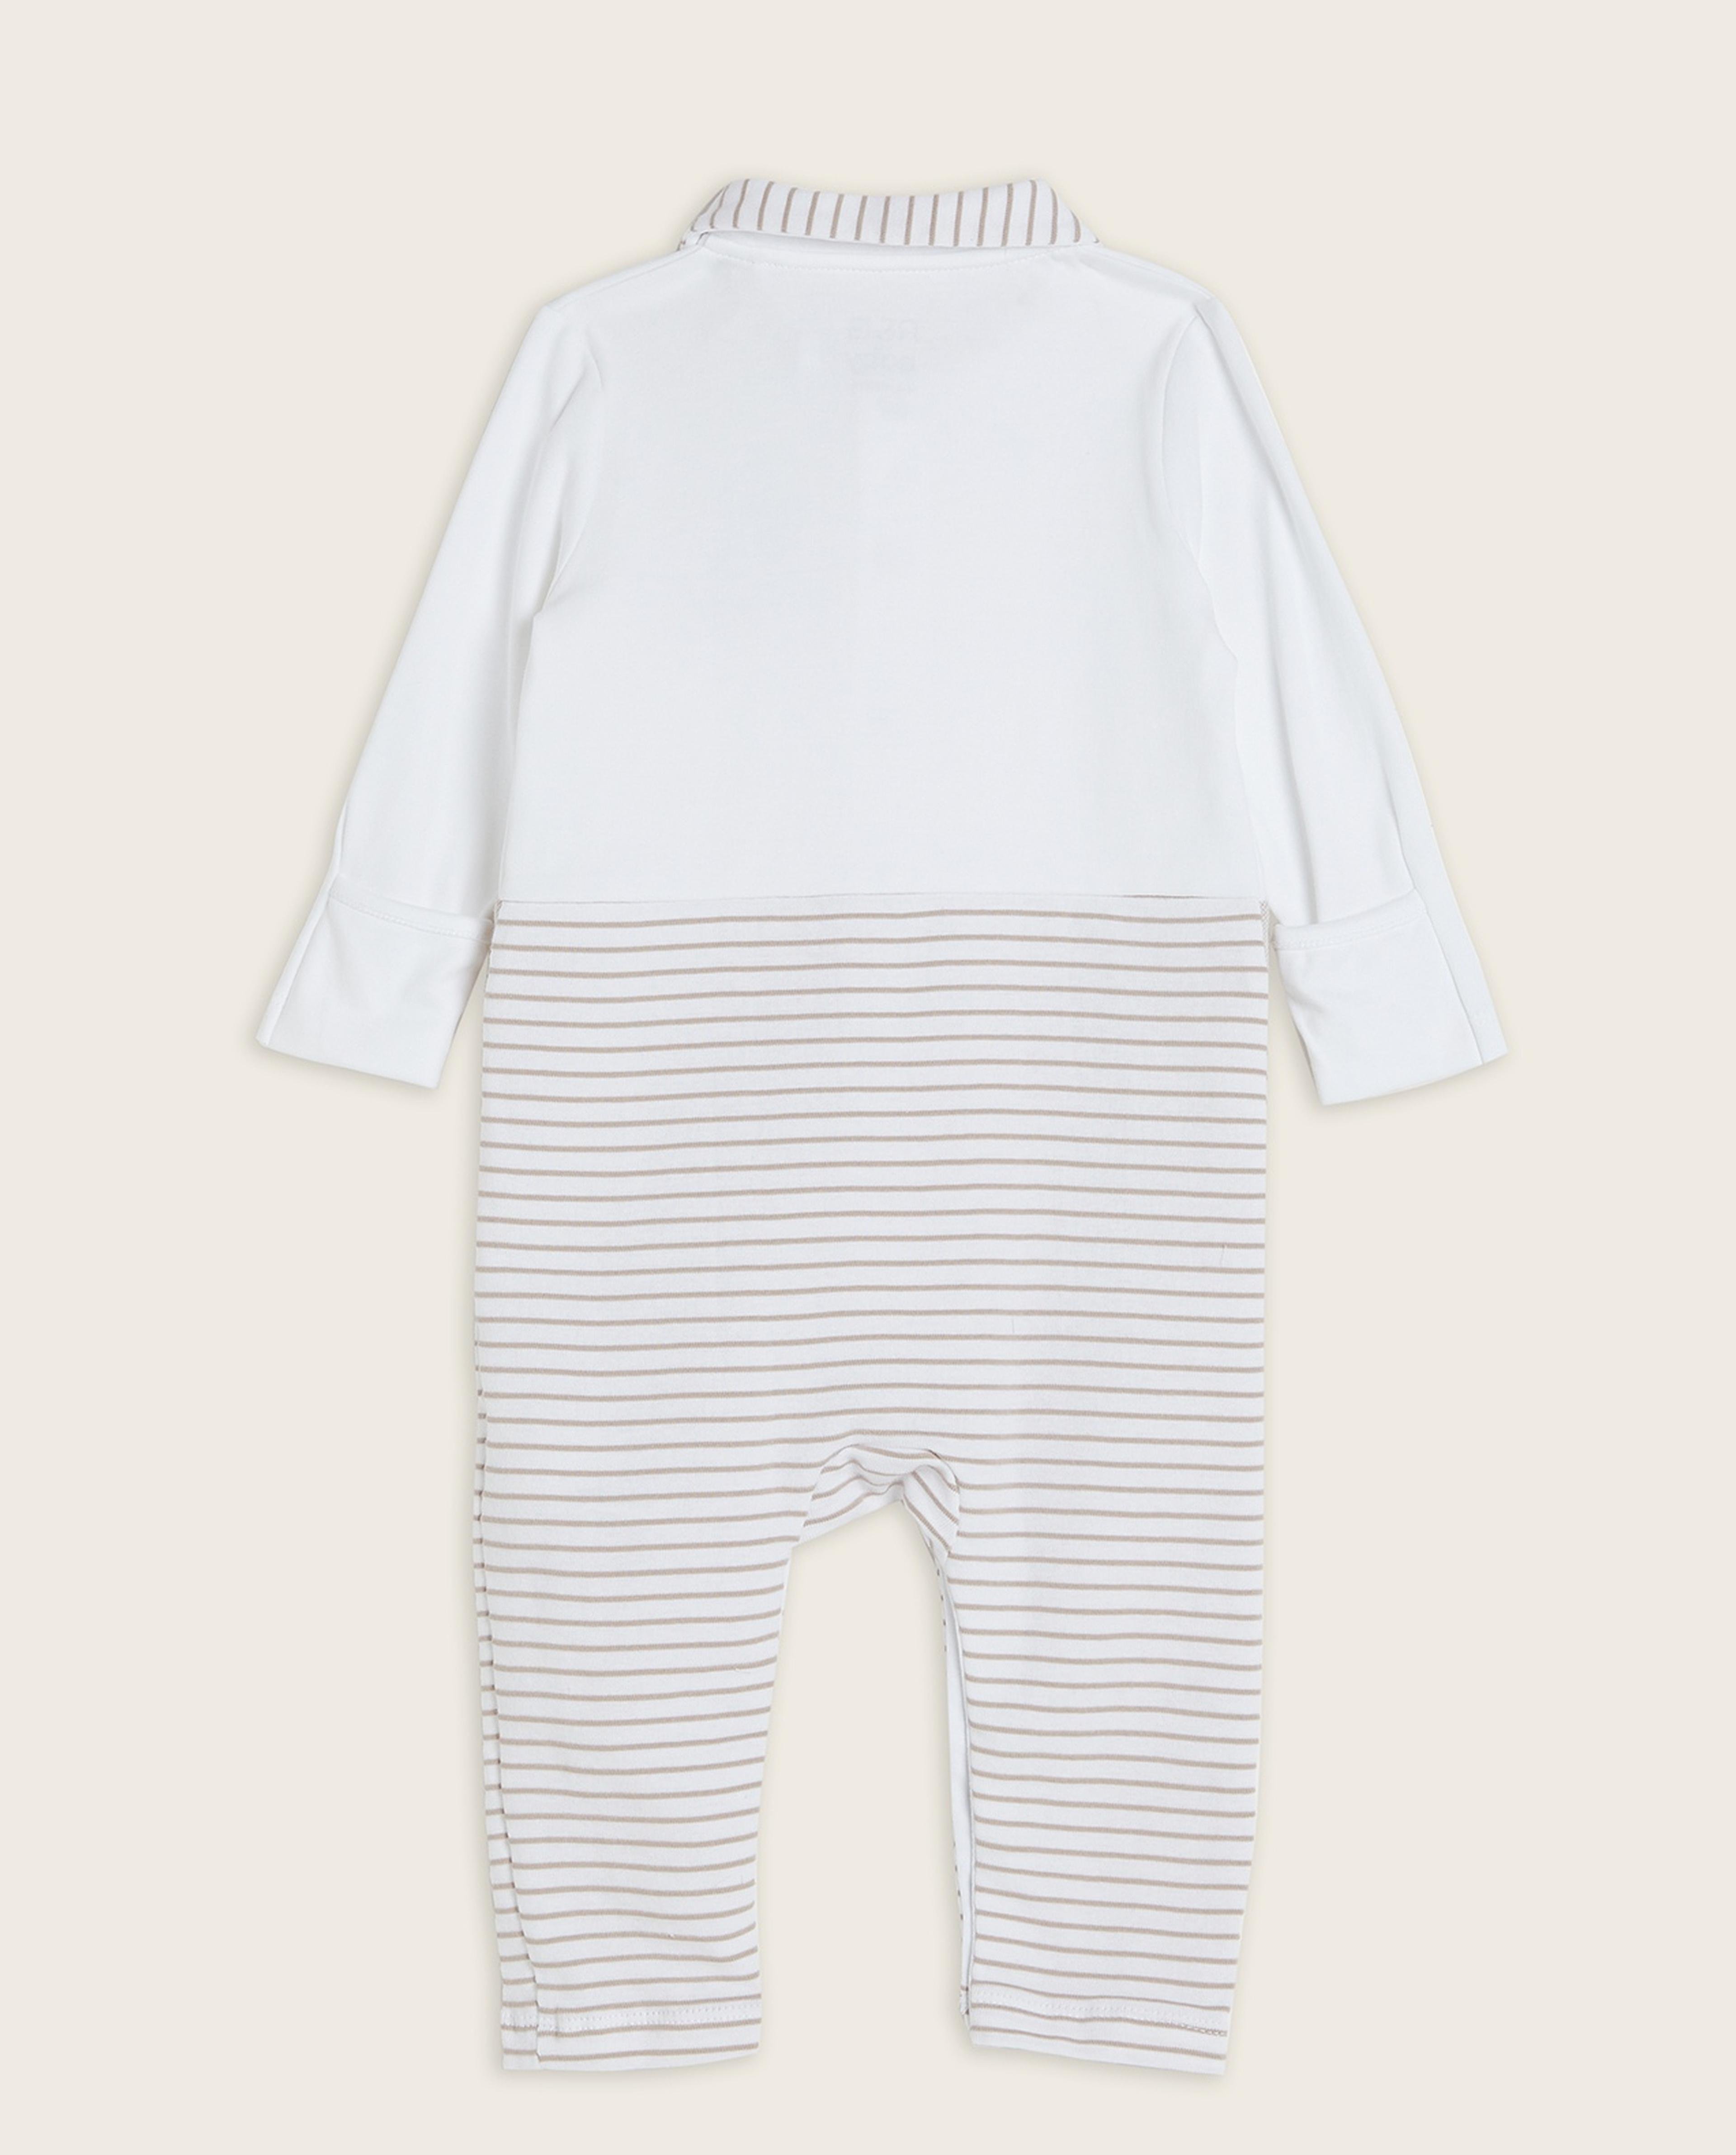 Striped Sleepsuit with Classic Collar and Long Sleeves